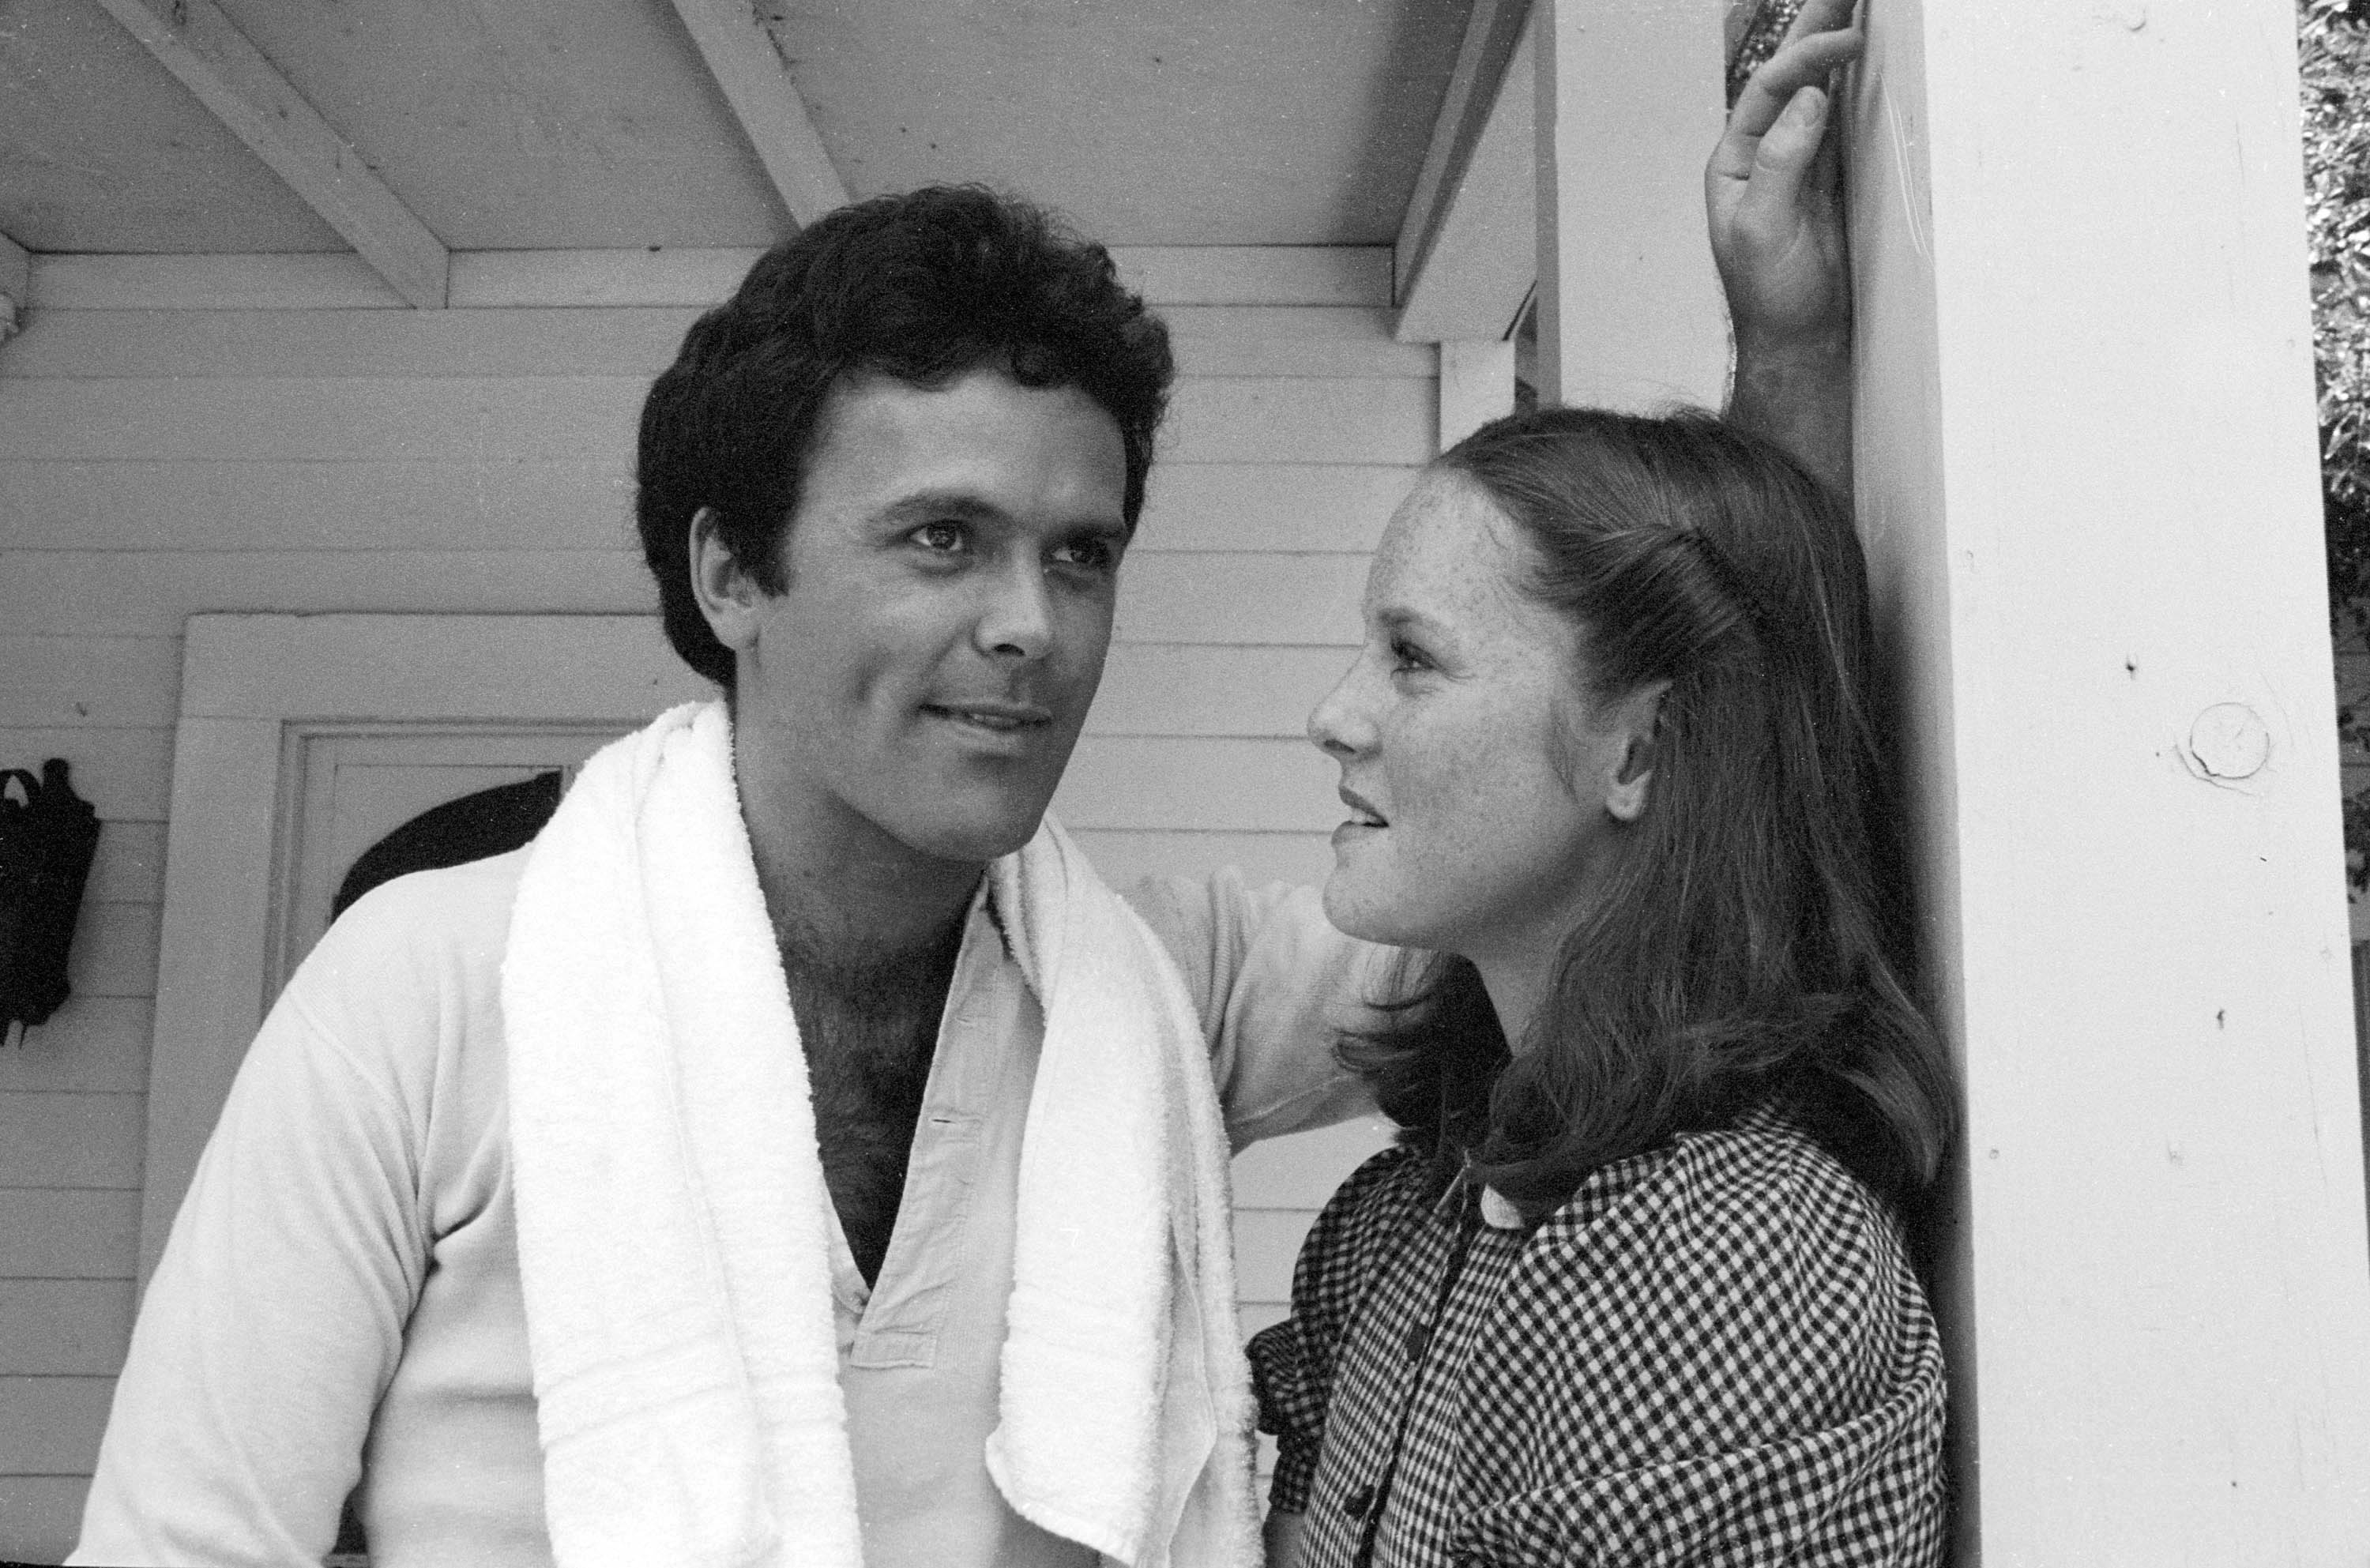 Mary McDonough and Hank Buchanan in Los Angeles in 1977 | Source: Getty Images